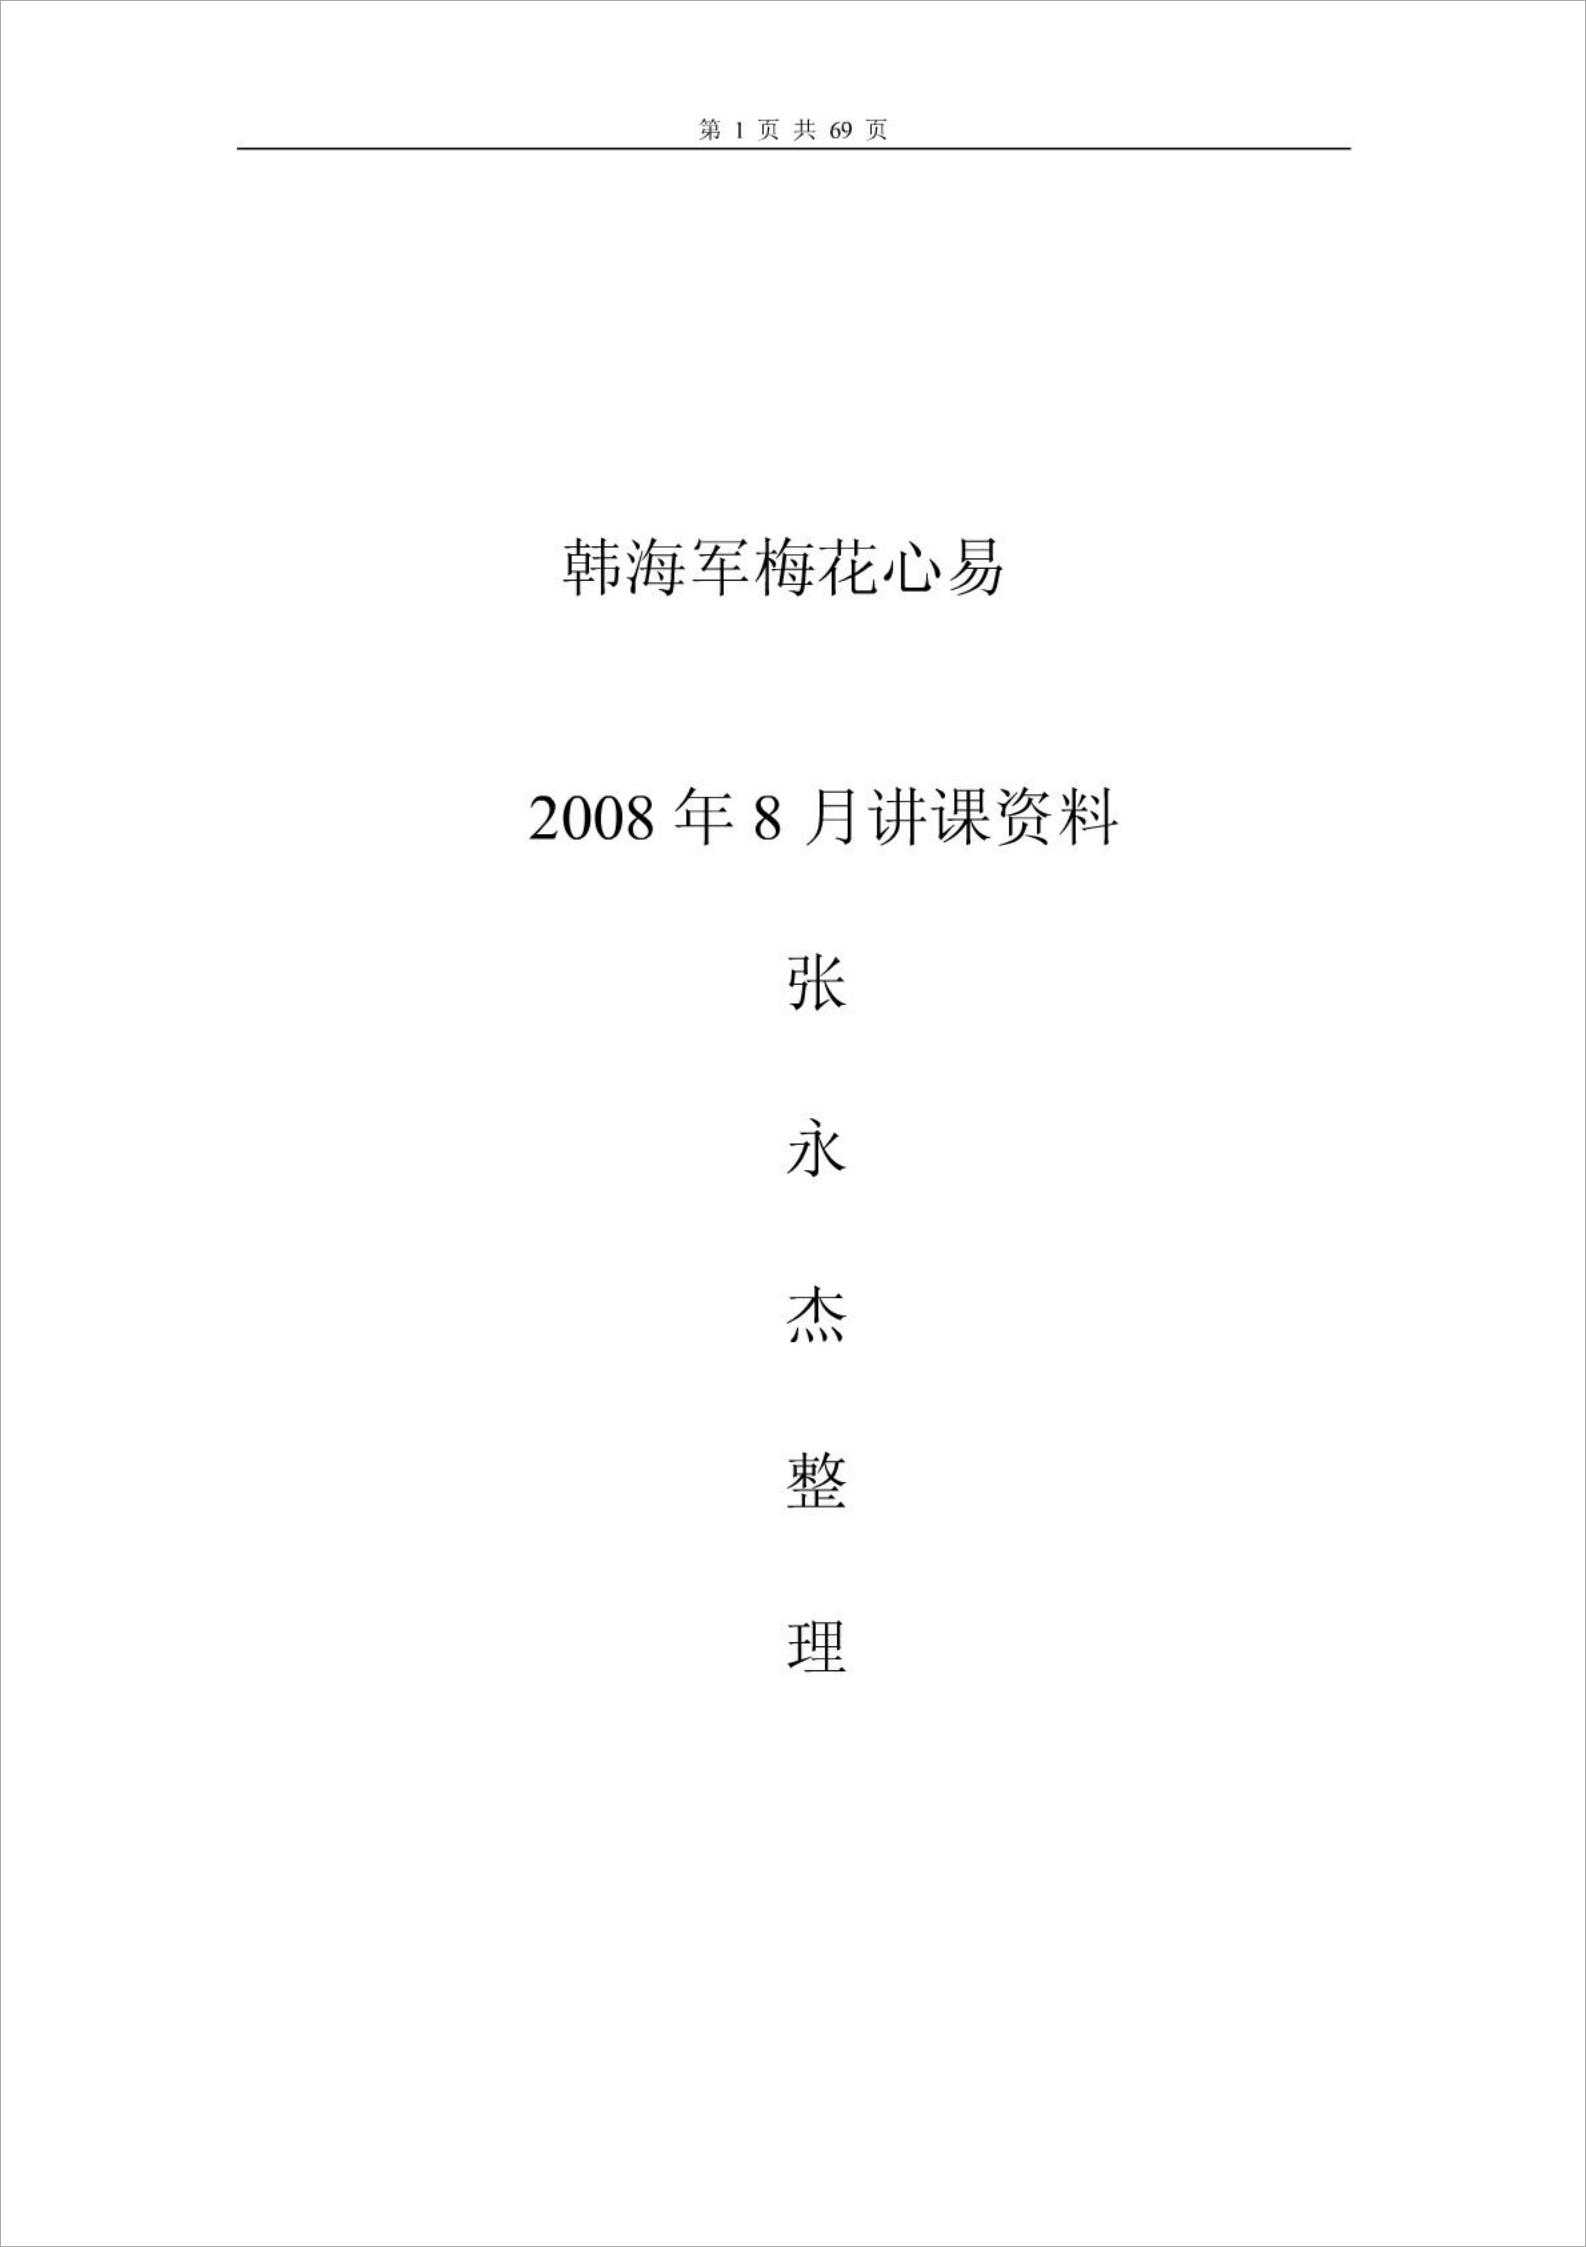 Han Navy Lecture Material.pdf